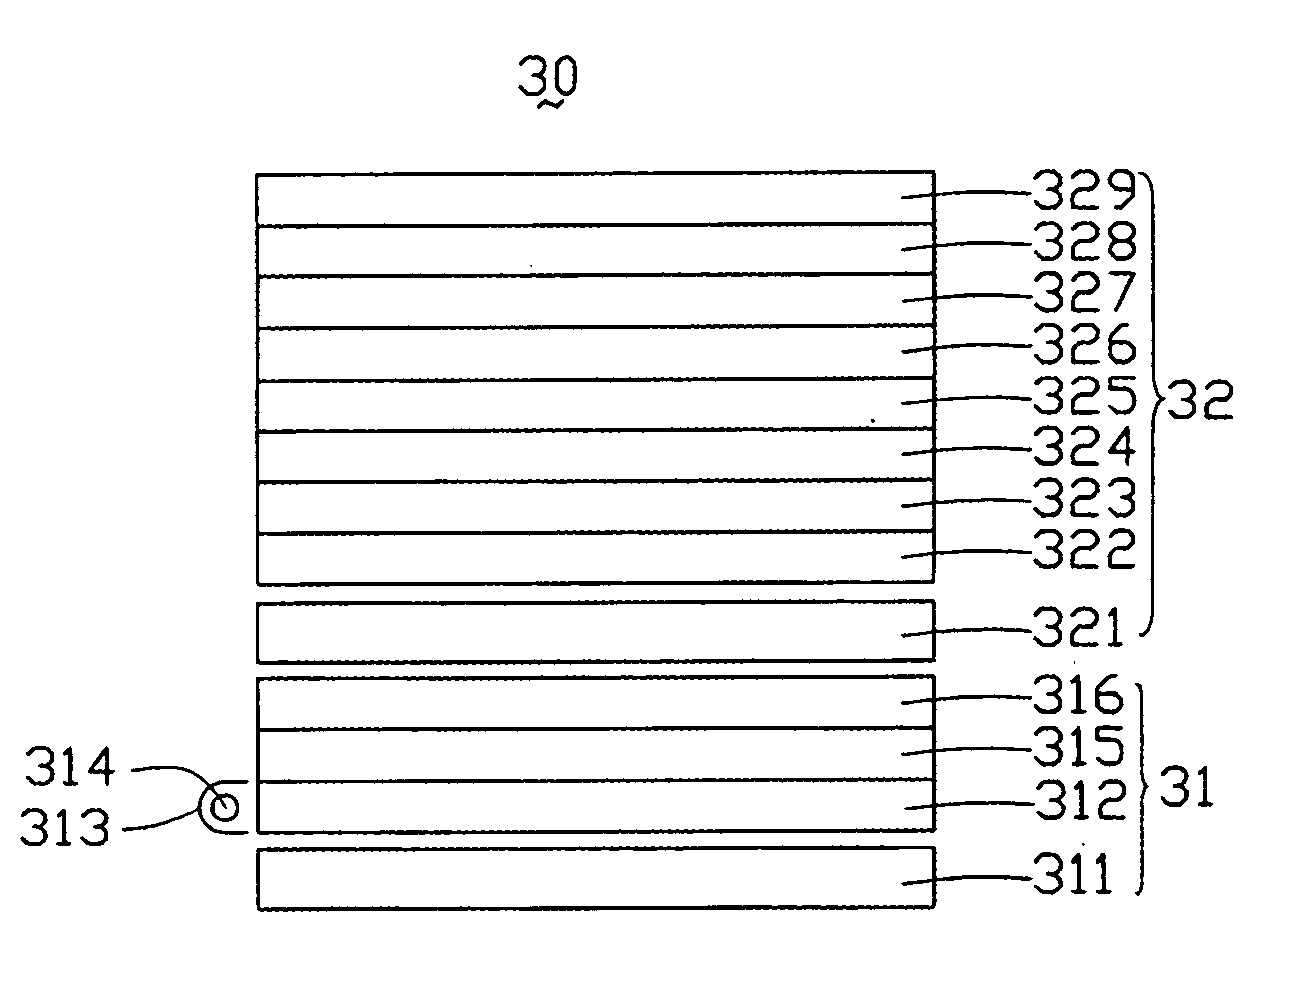 Display device incorporating a phase-change layer